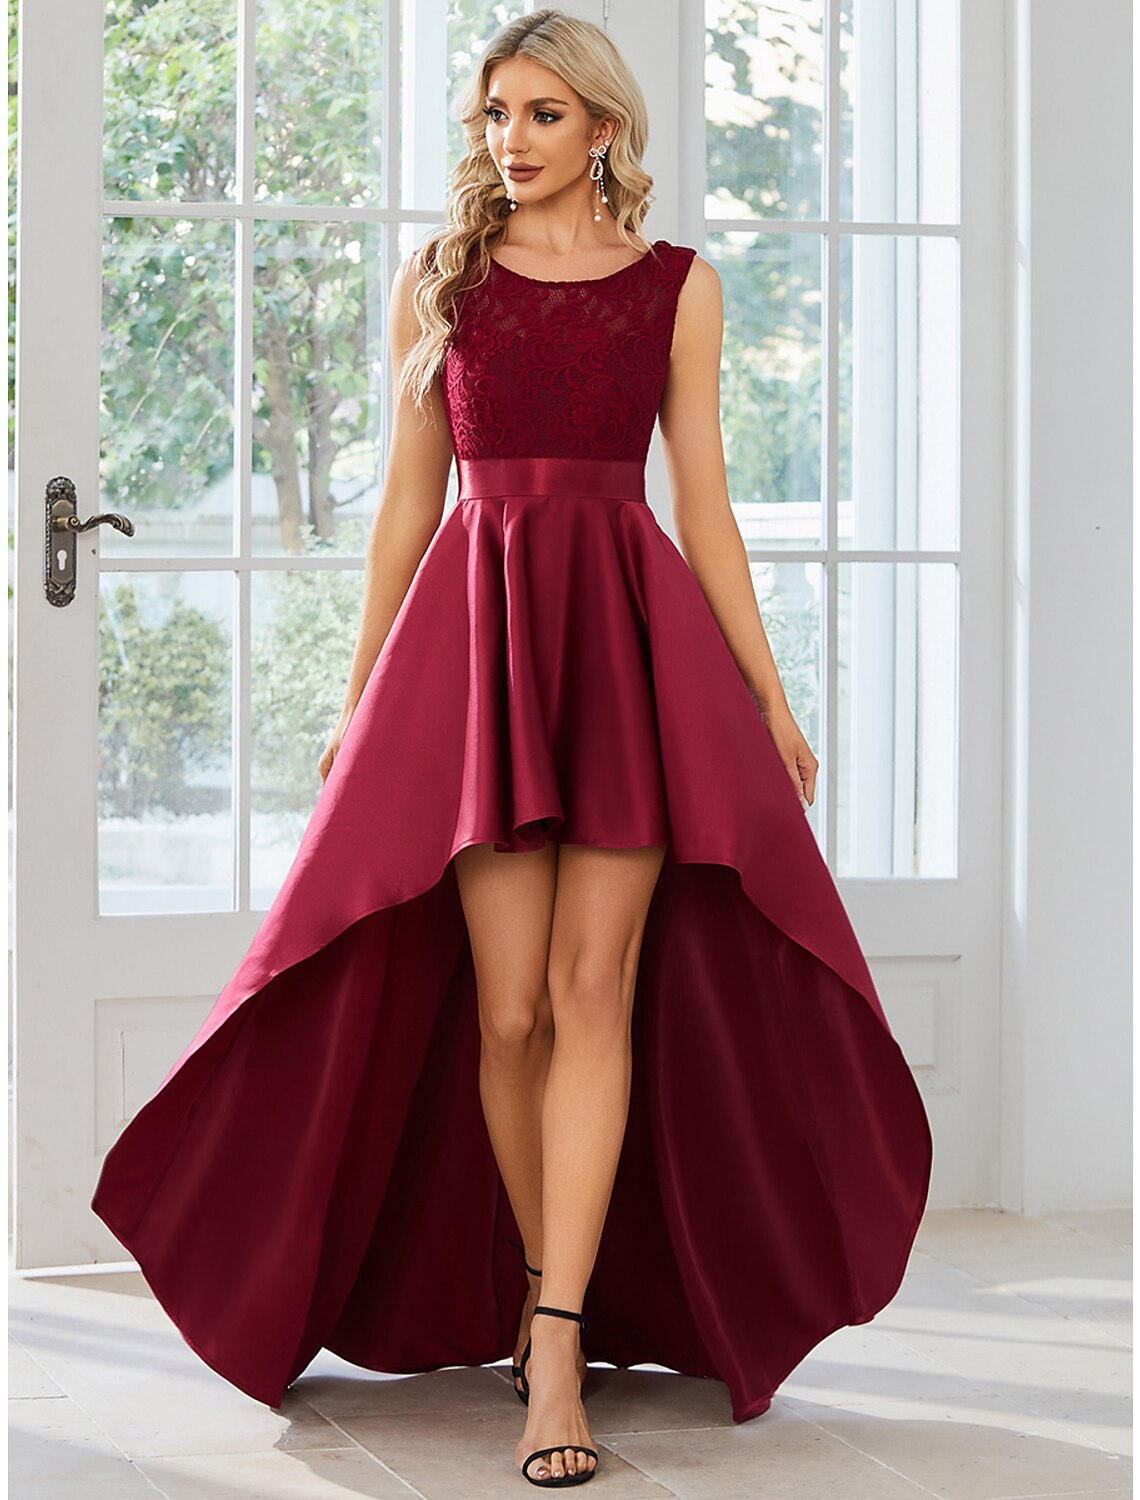 A-Line Wedding Guest Dresses Casual Dress Party Wear Asymmetrical Sleeveless Jewel Neck Satin with Pure Color